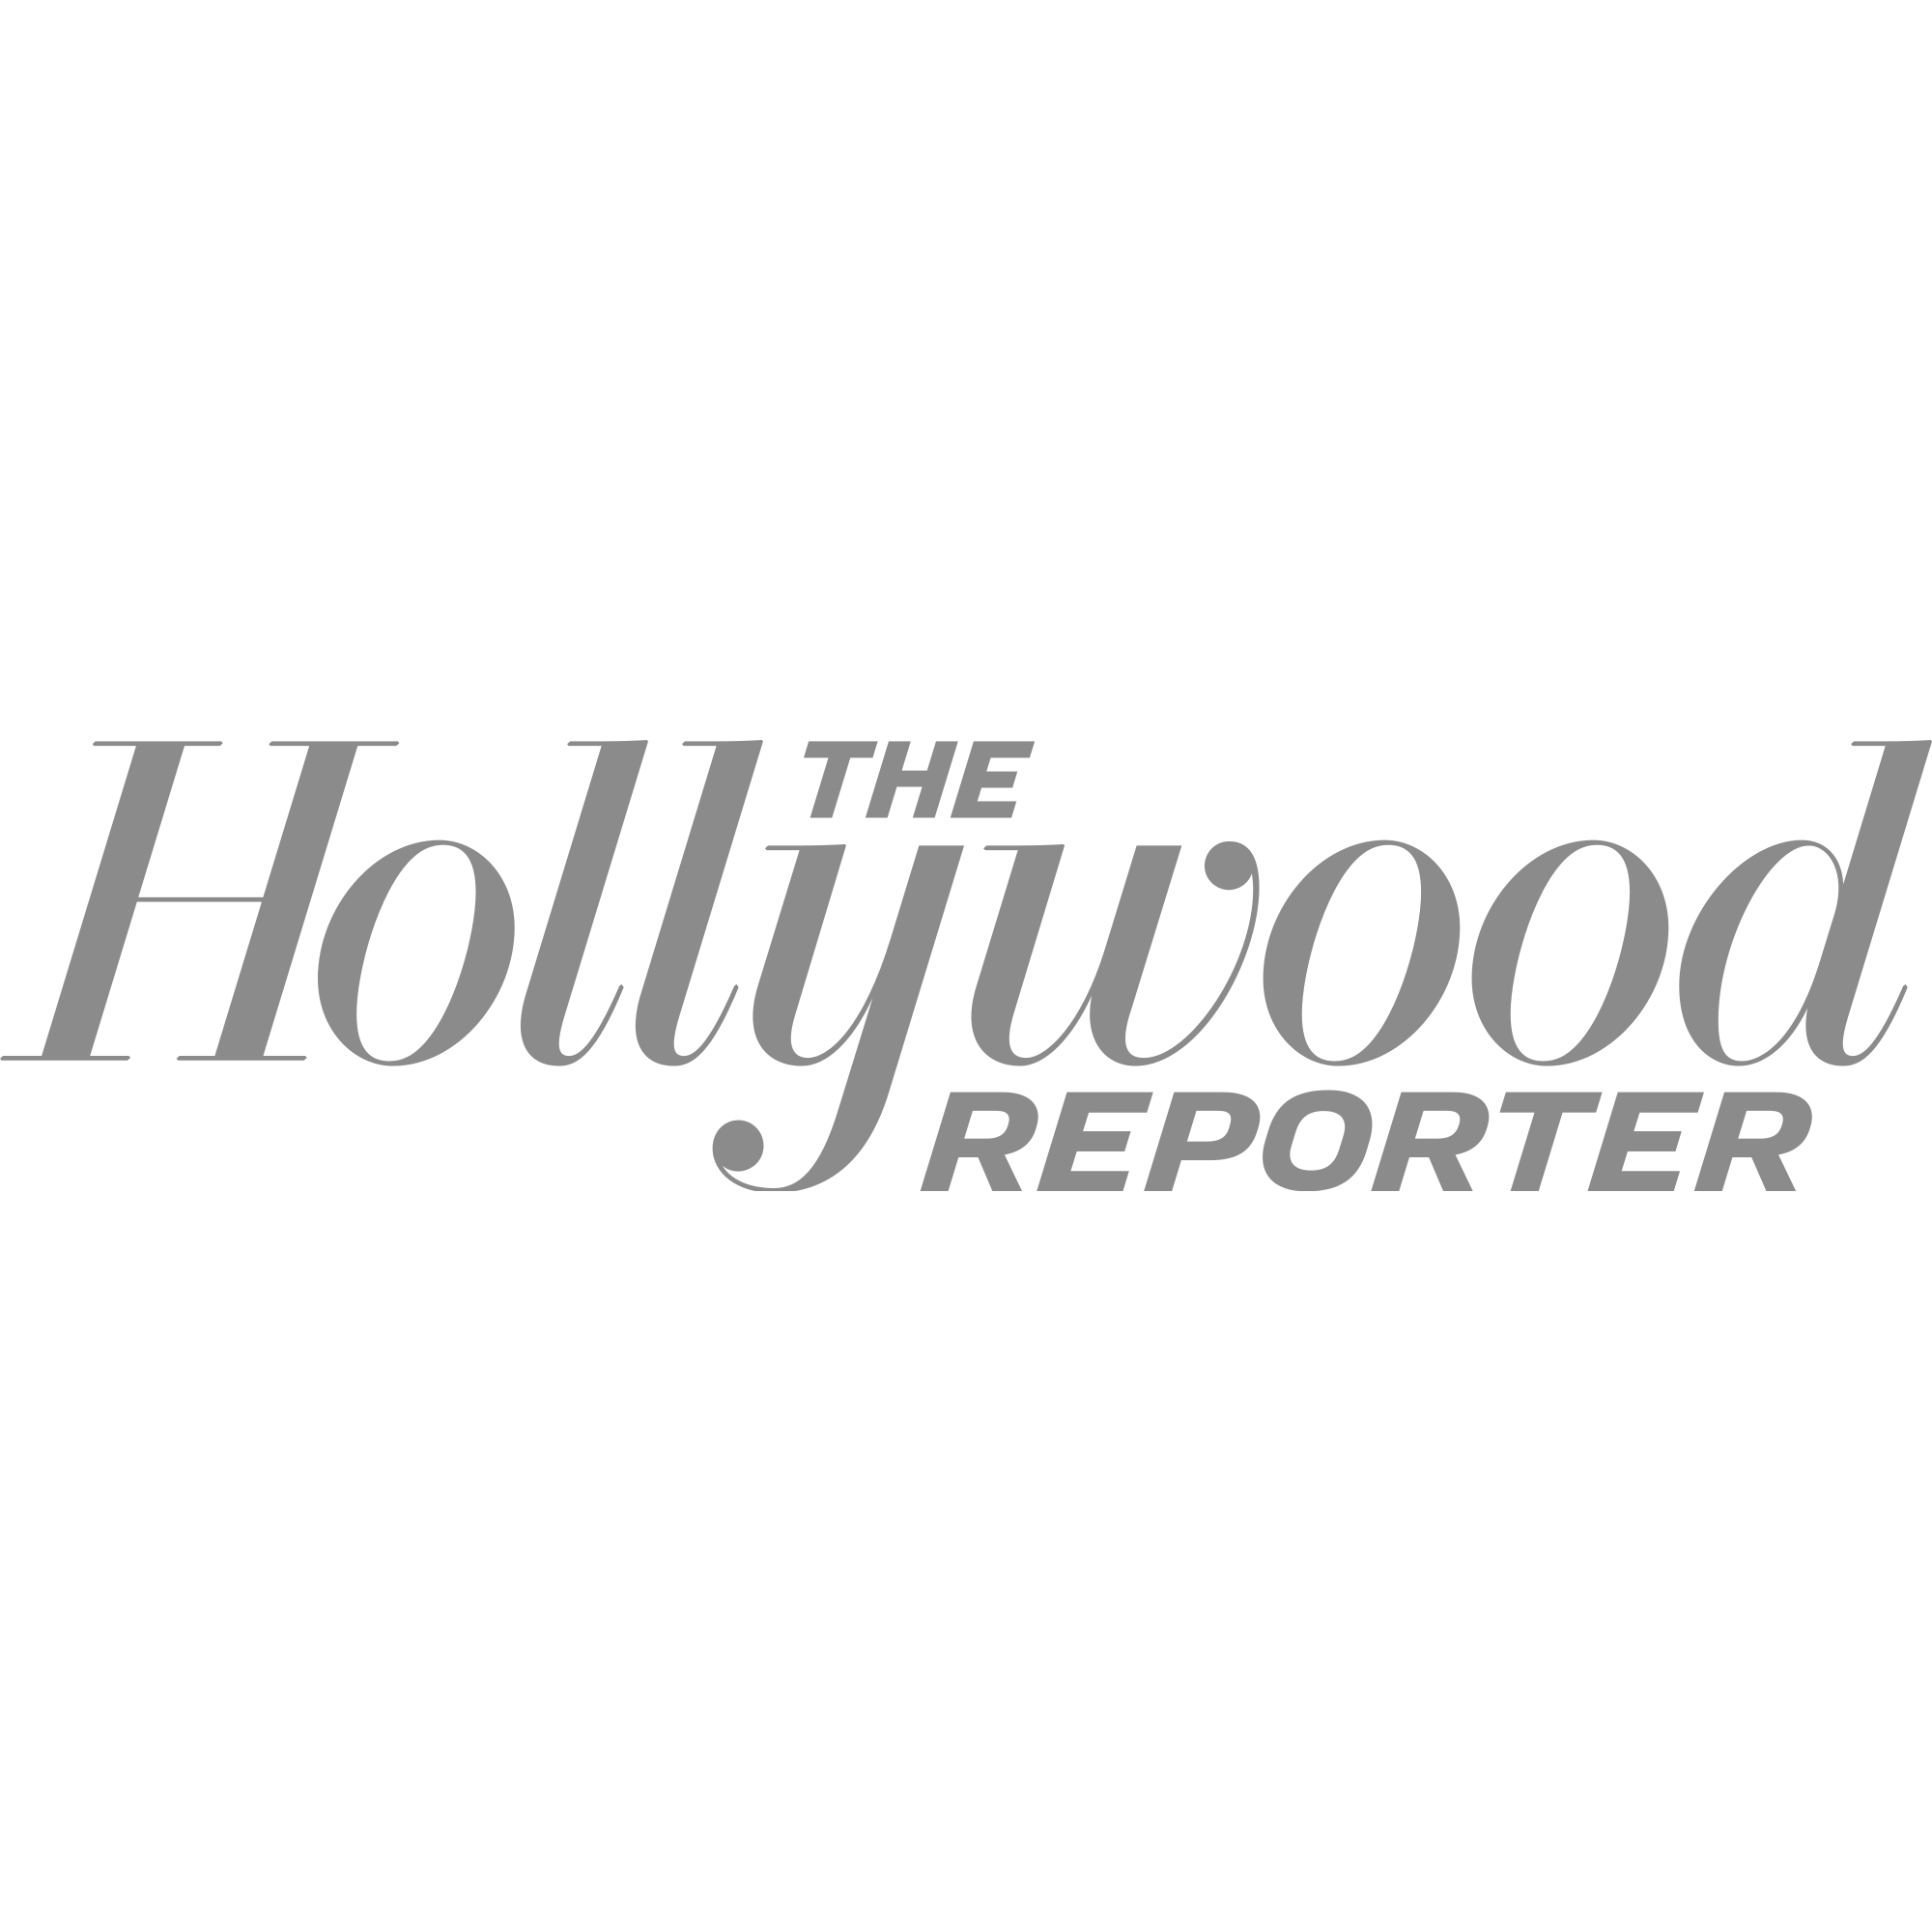 088_The_Hollywood_Reporter_logo.svg copy.png